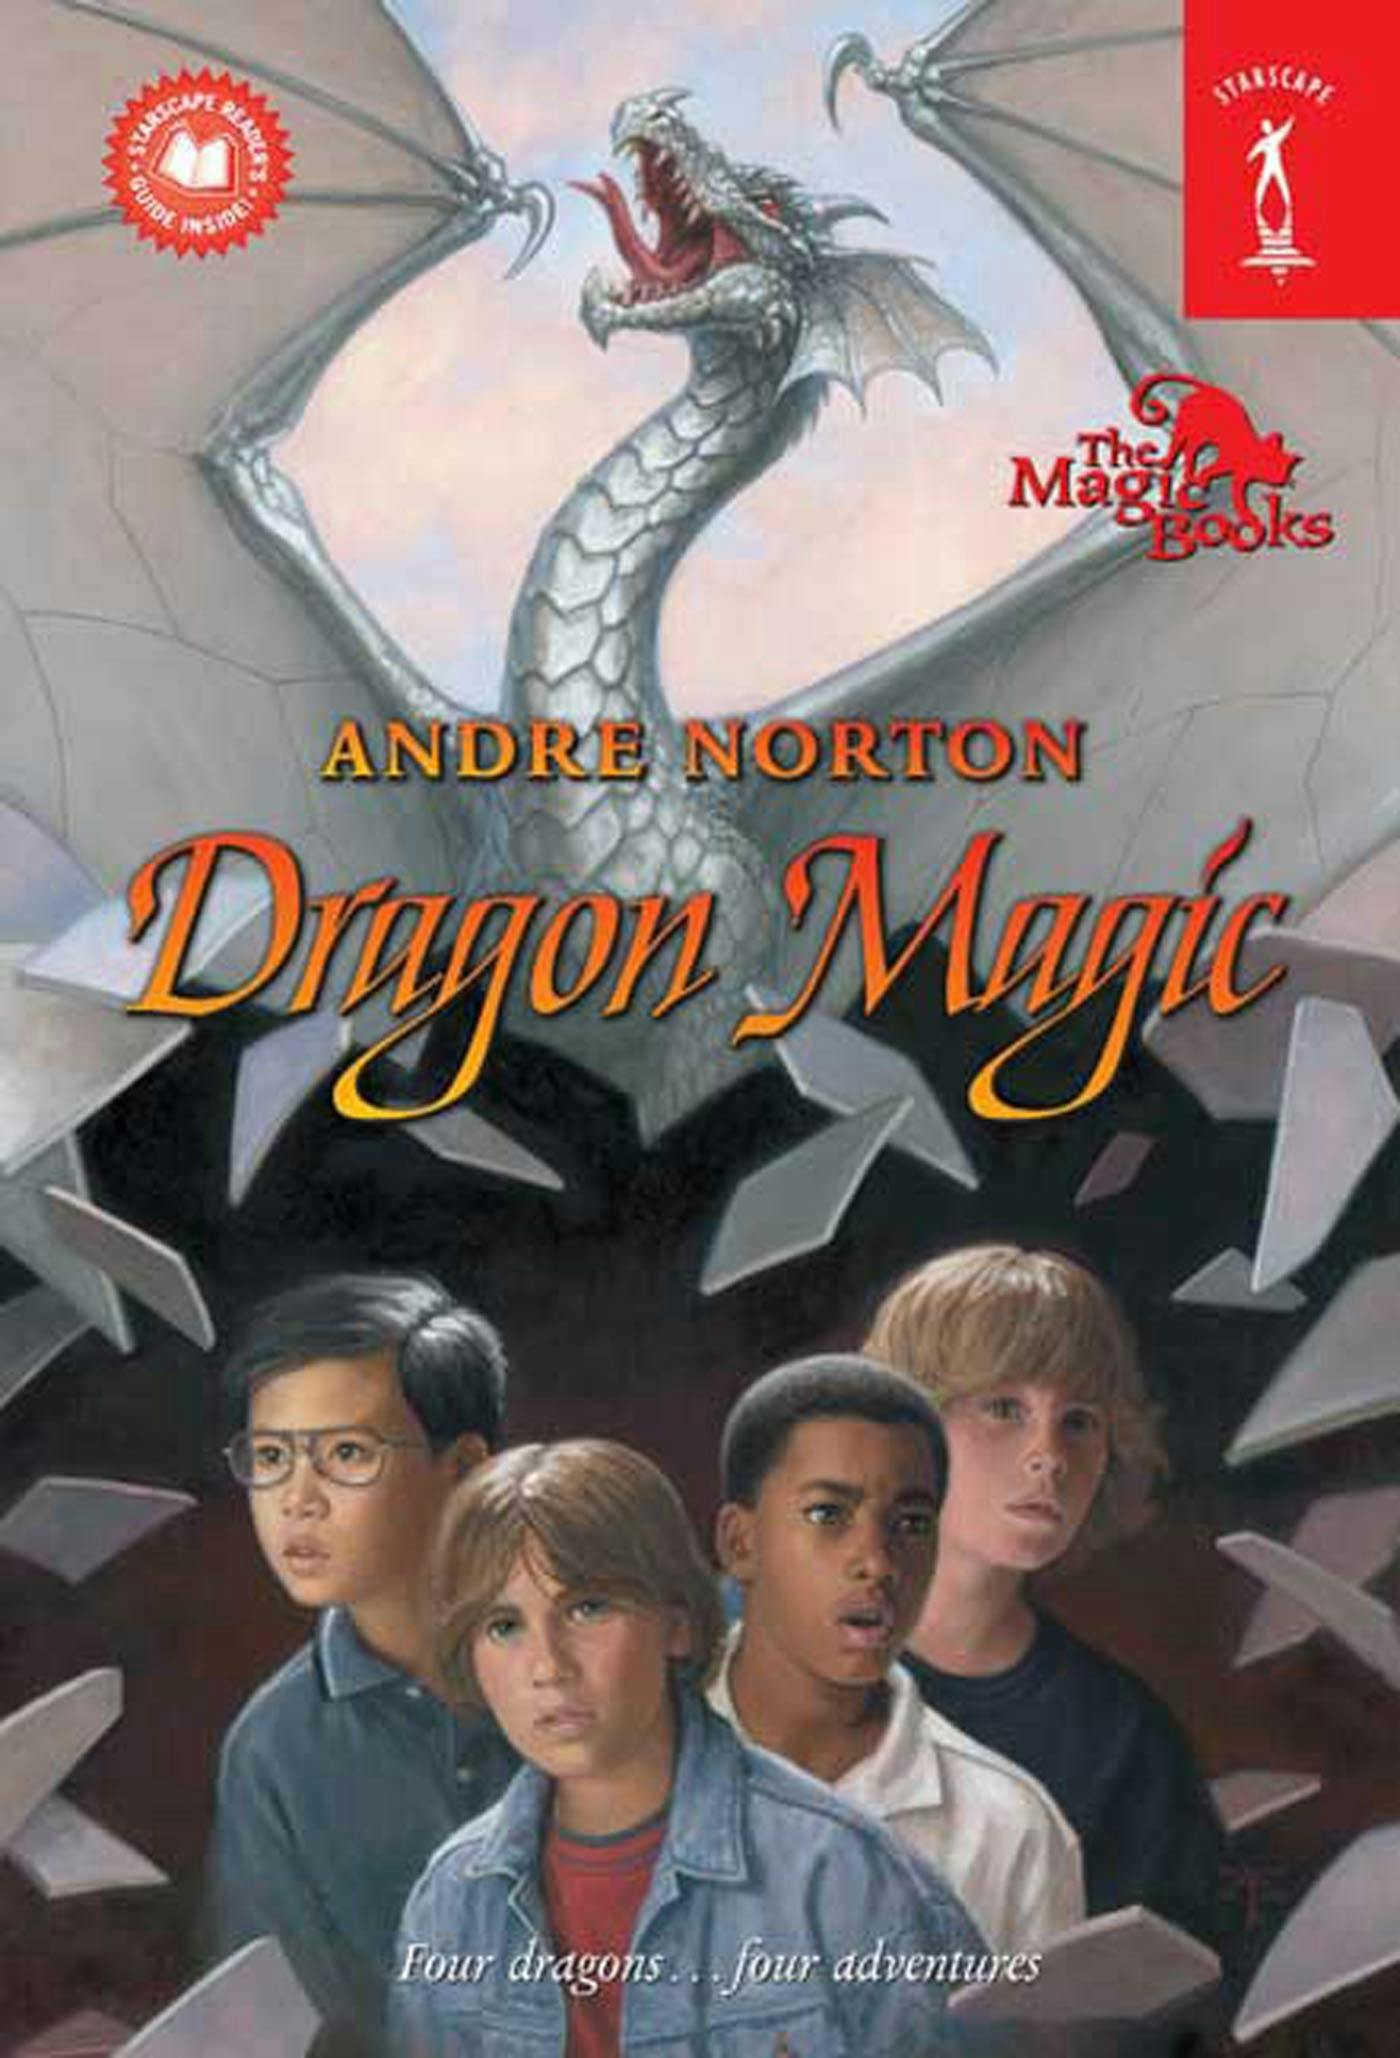 Cover for the book titled as: Dragon Magic